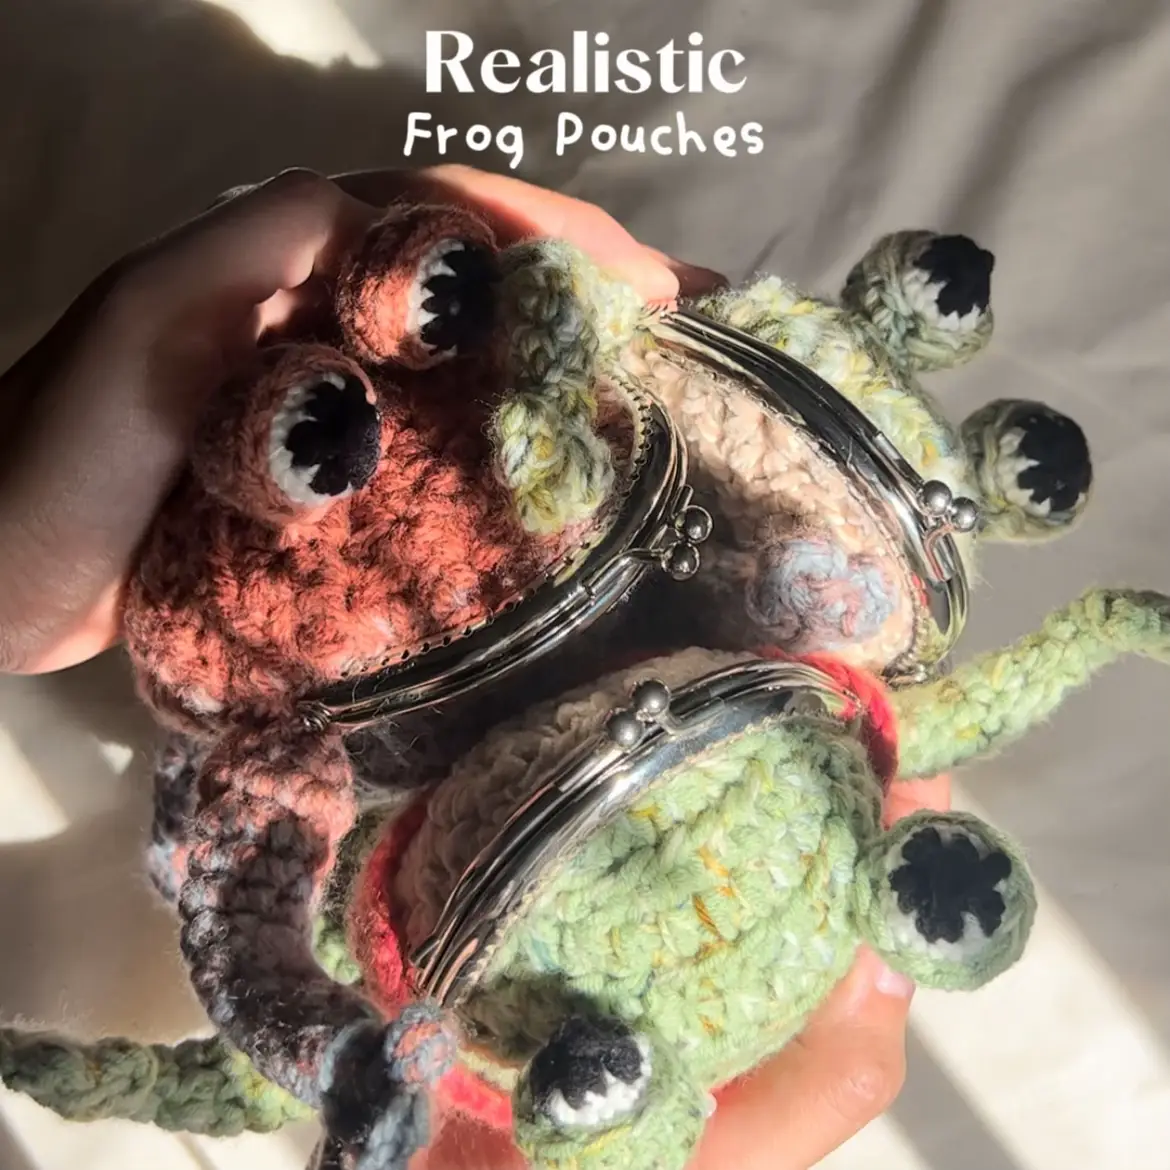 Have you SEEN these REALISTIC frog pouches?!